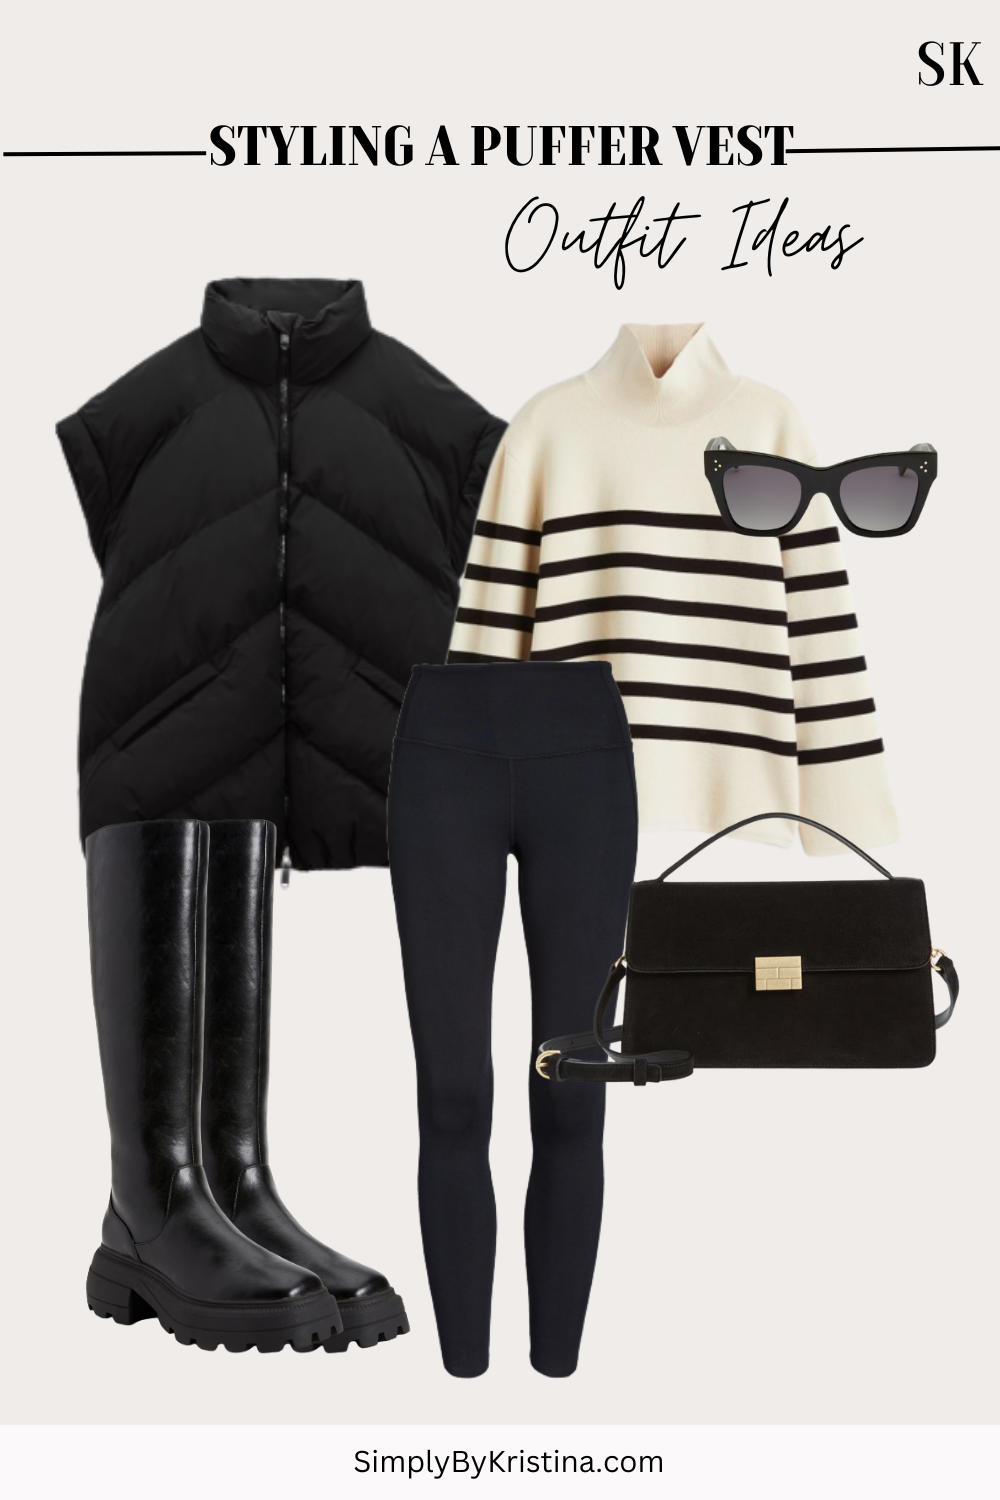 5 Ways To Style An Oversized Puffer Vest